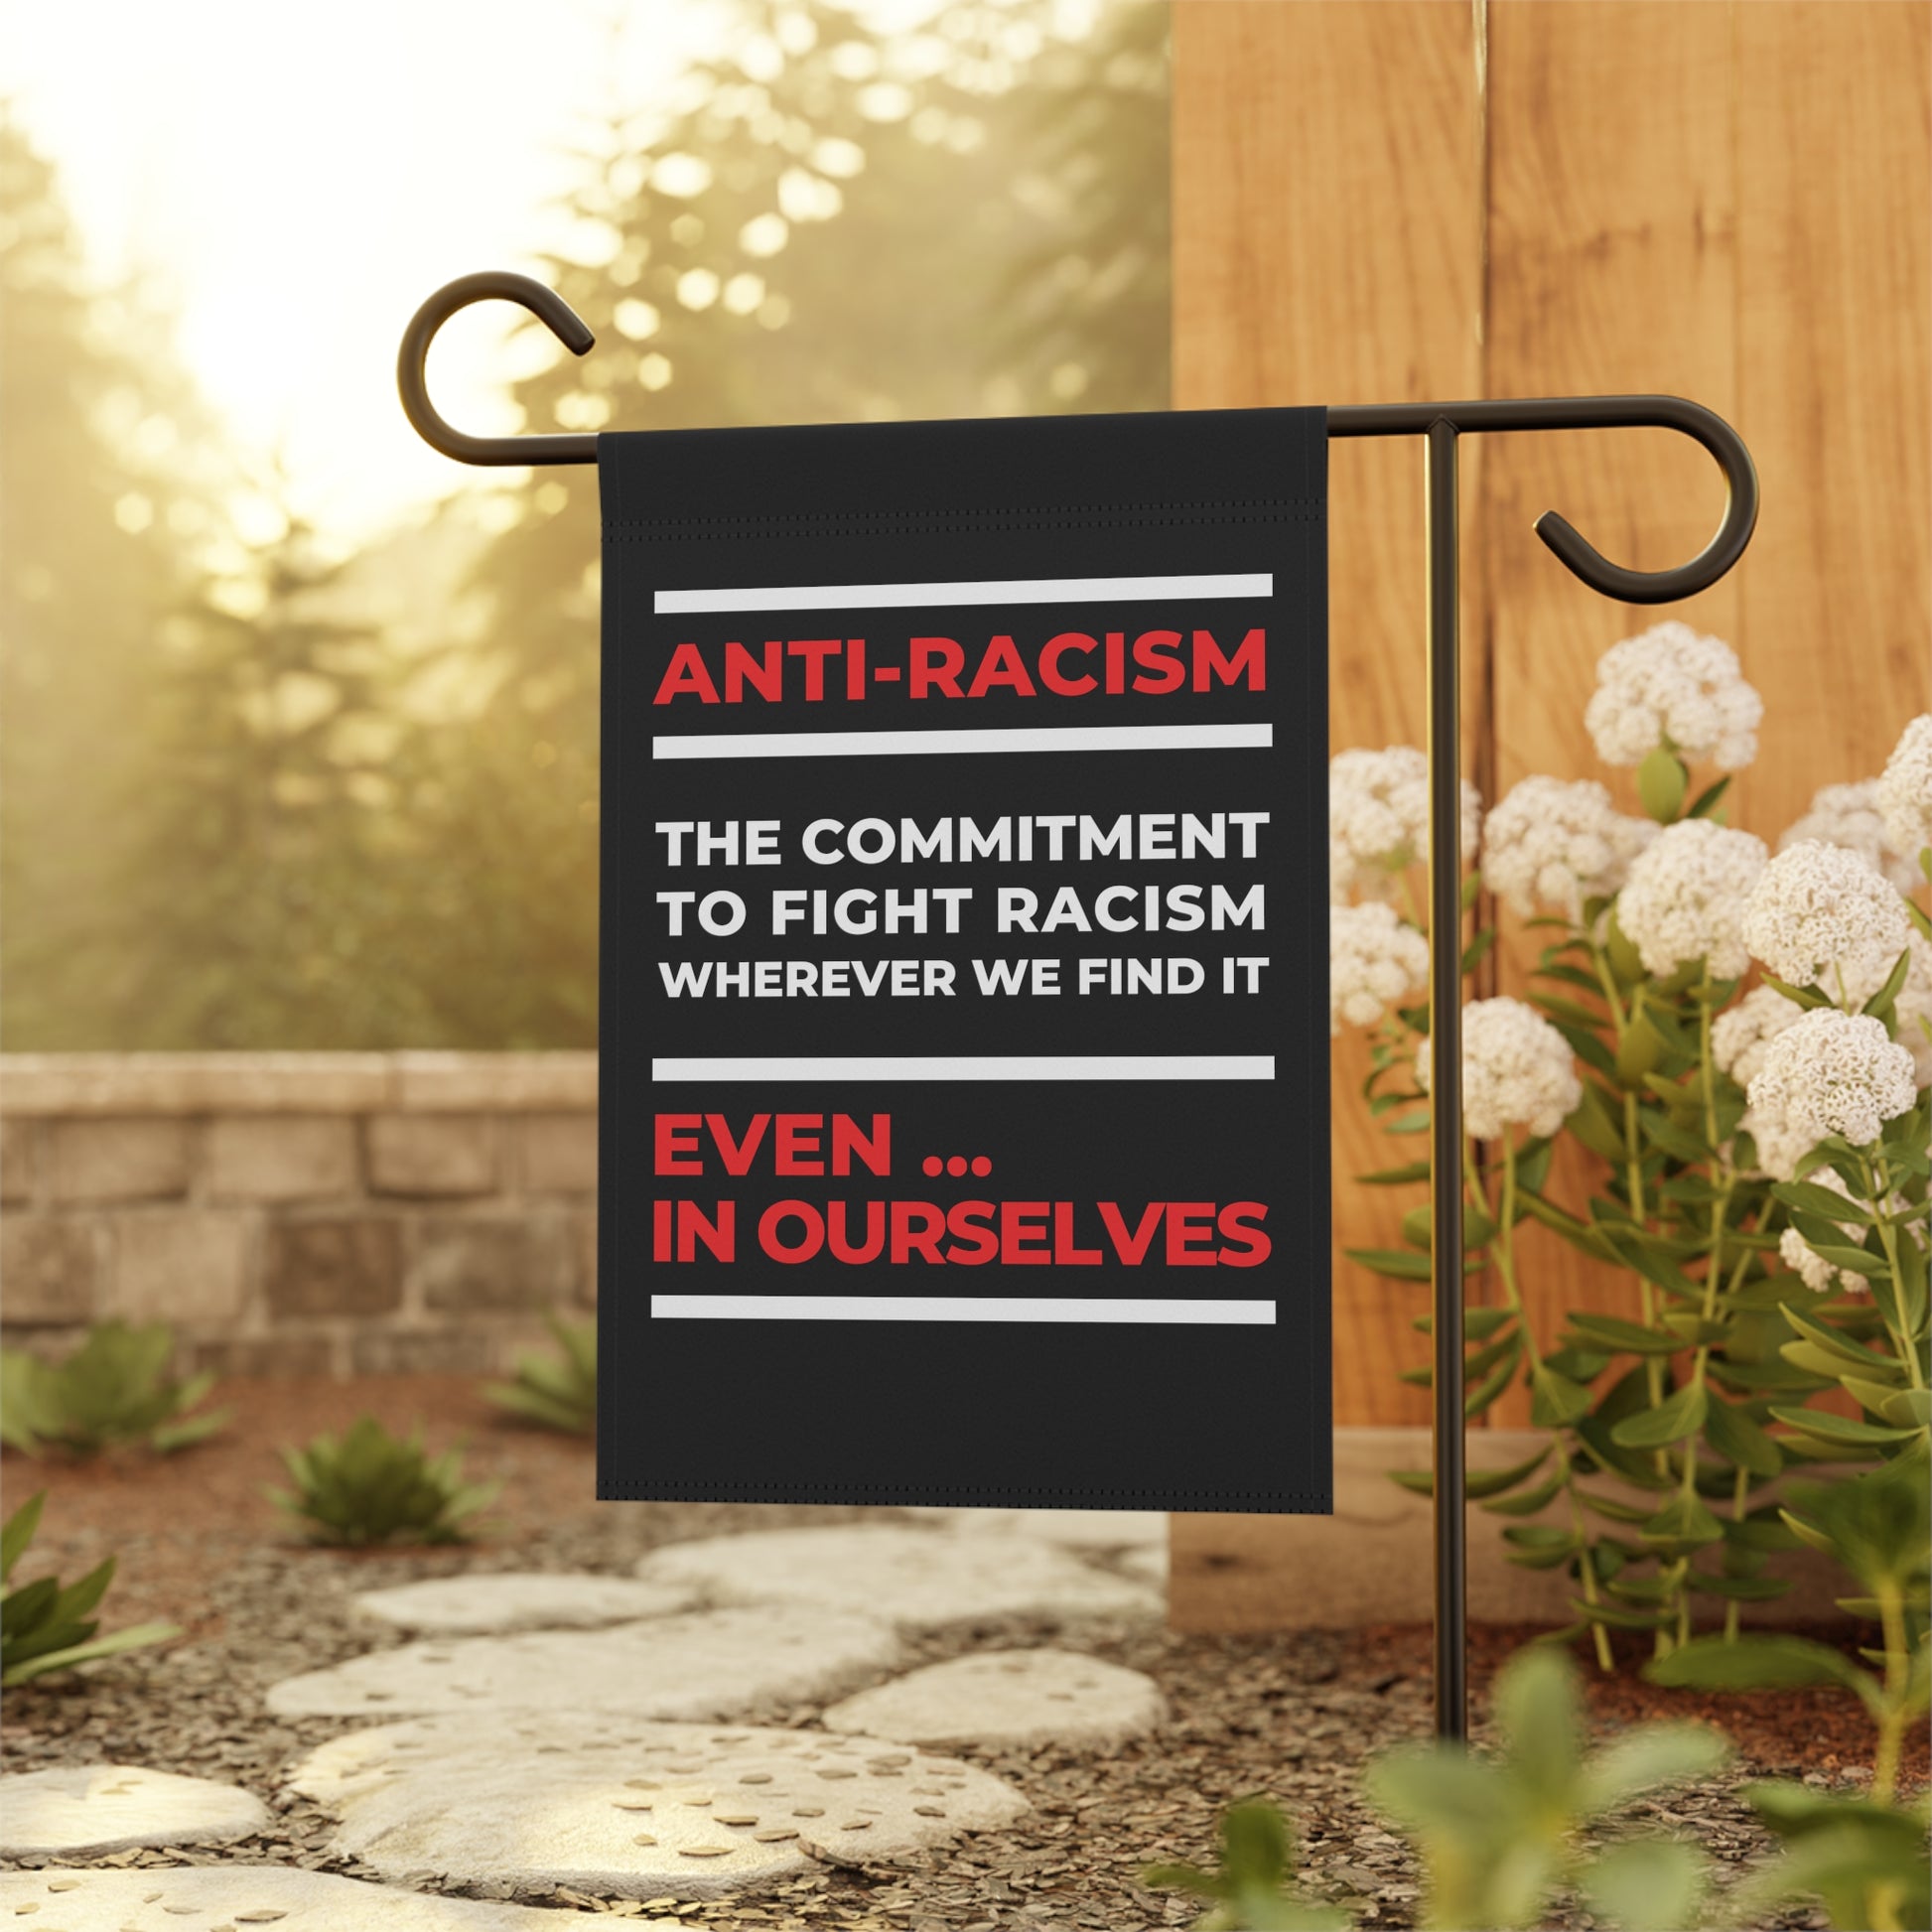 Black anti-racism garden flag to show your support for diversity and inclusion. Take a stand against all forms of discrimination.